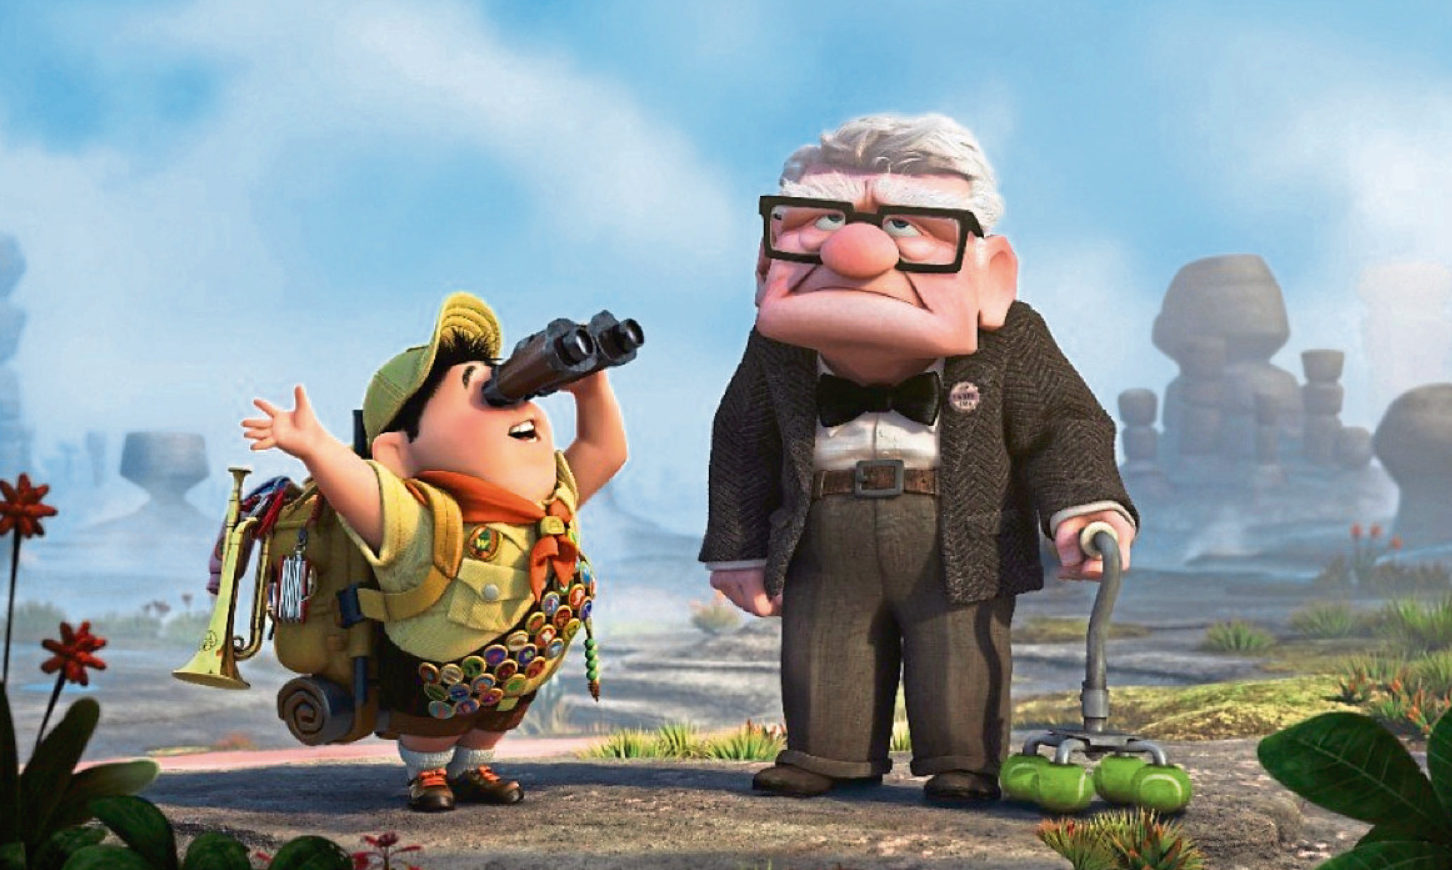 The Pixar classic, Up, is also on the Drive In Movies programme at the Virtual Edinburgh Festival